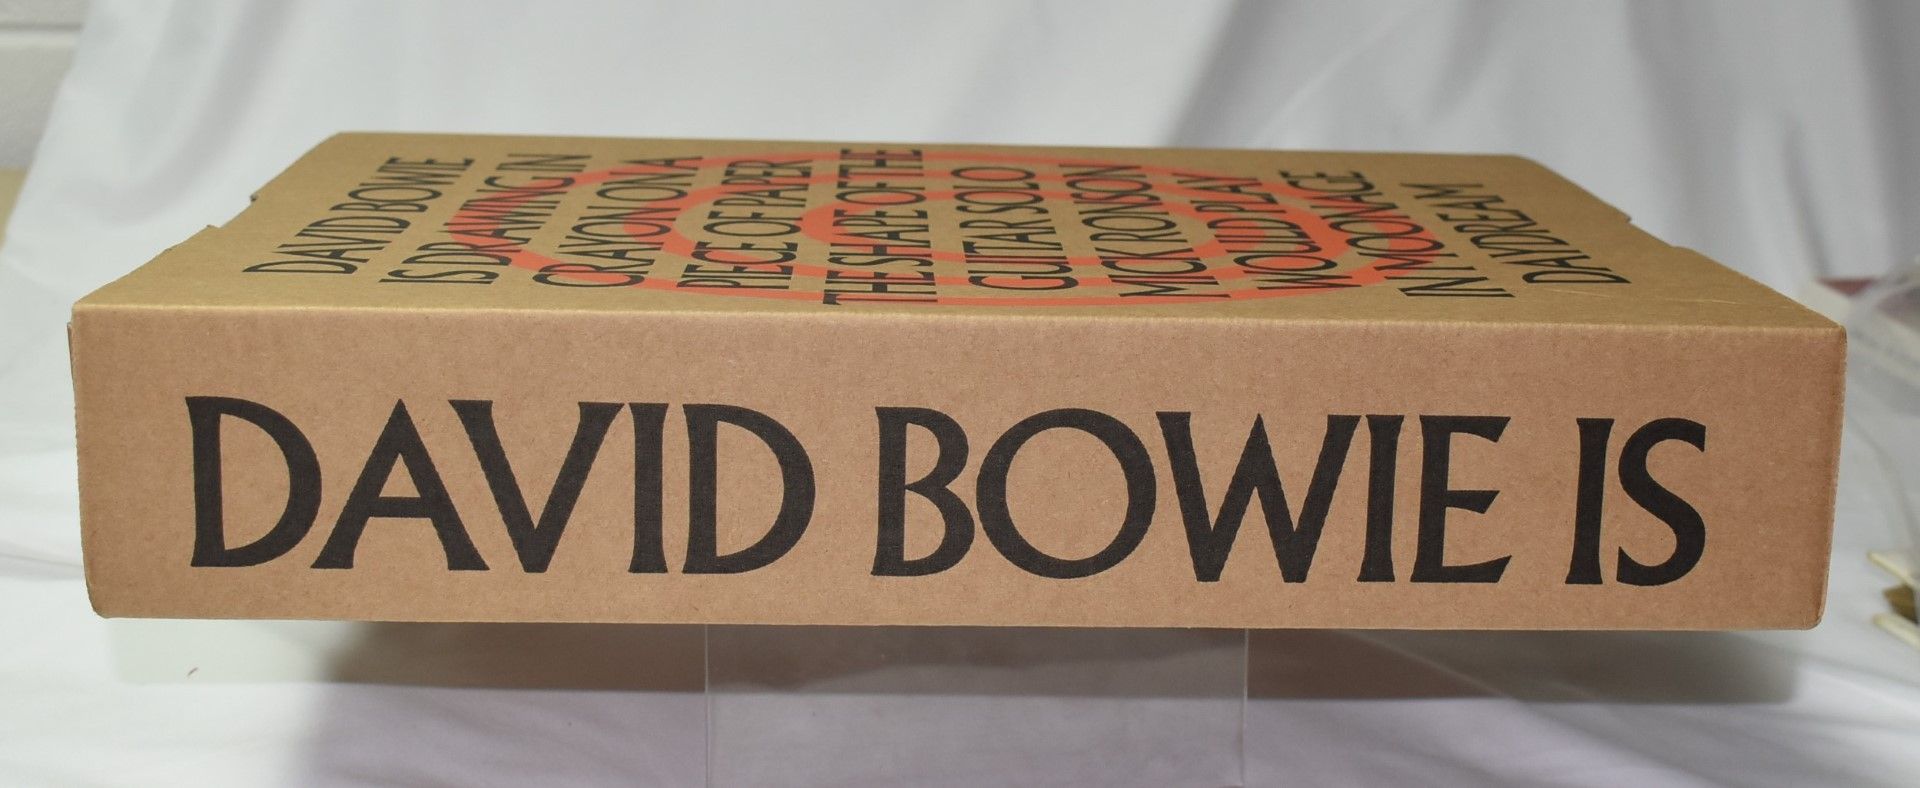 1 x David Bowie IS Personal Portfolio Black Collector's Edition Autographed Book of the V&A - Image 2 of 6